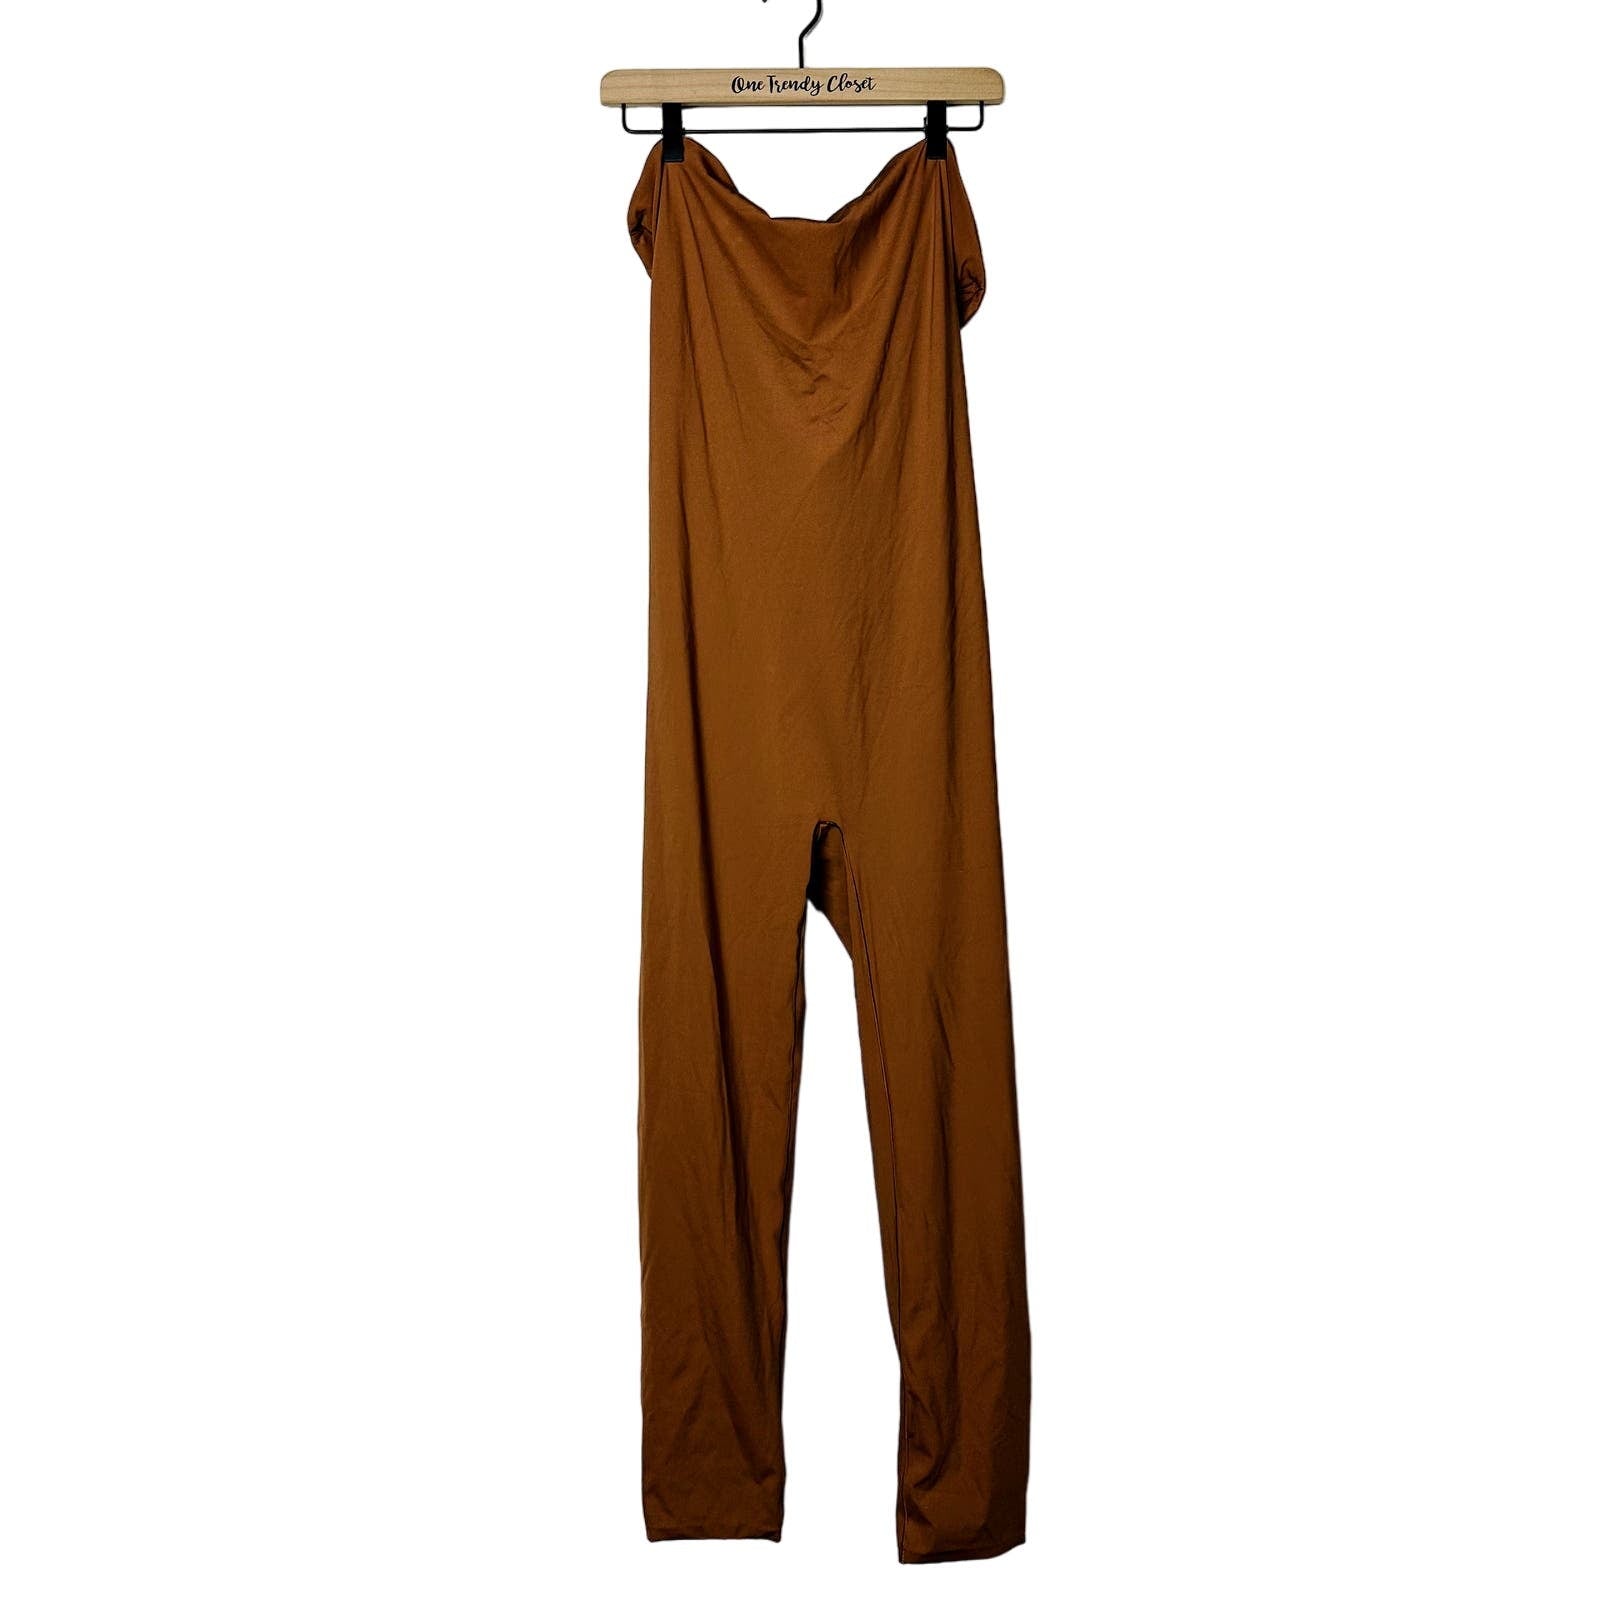 Skims NWT Caramel All-in-One Strapless Jumpsuit Size 4X